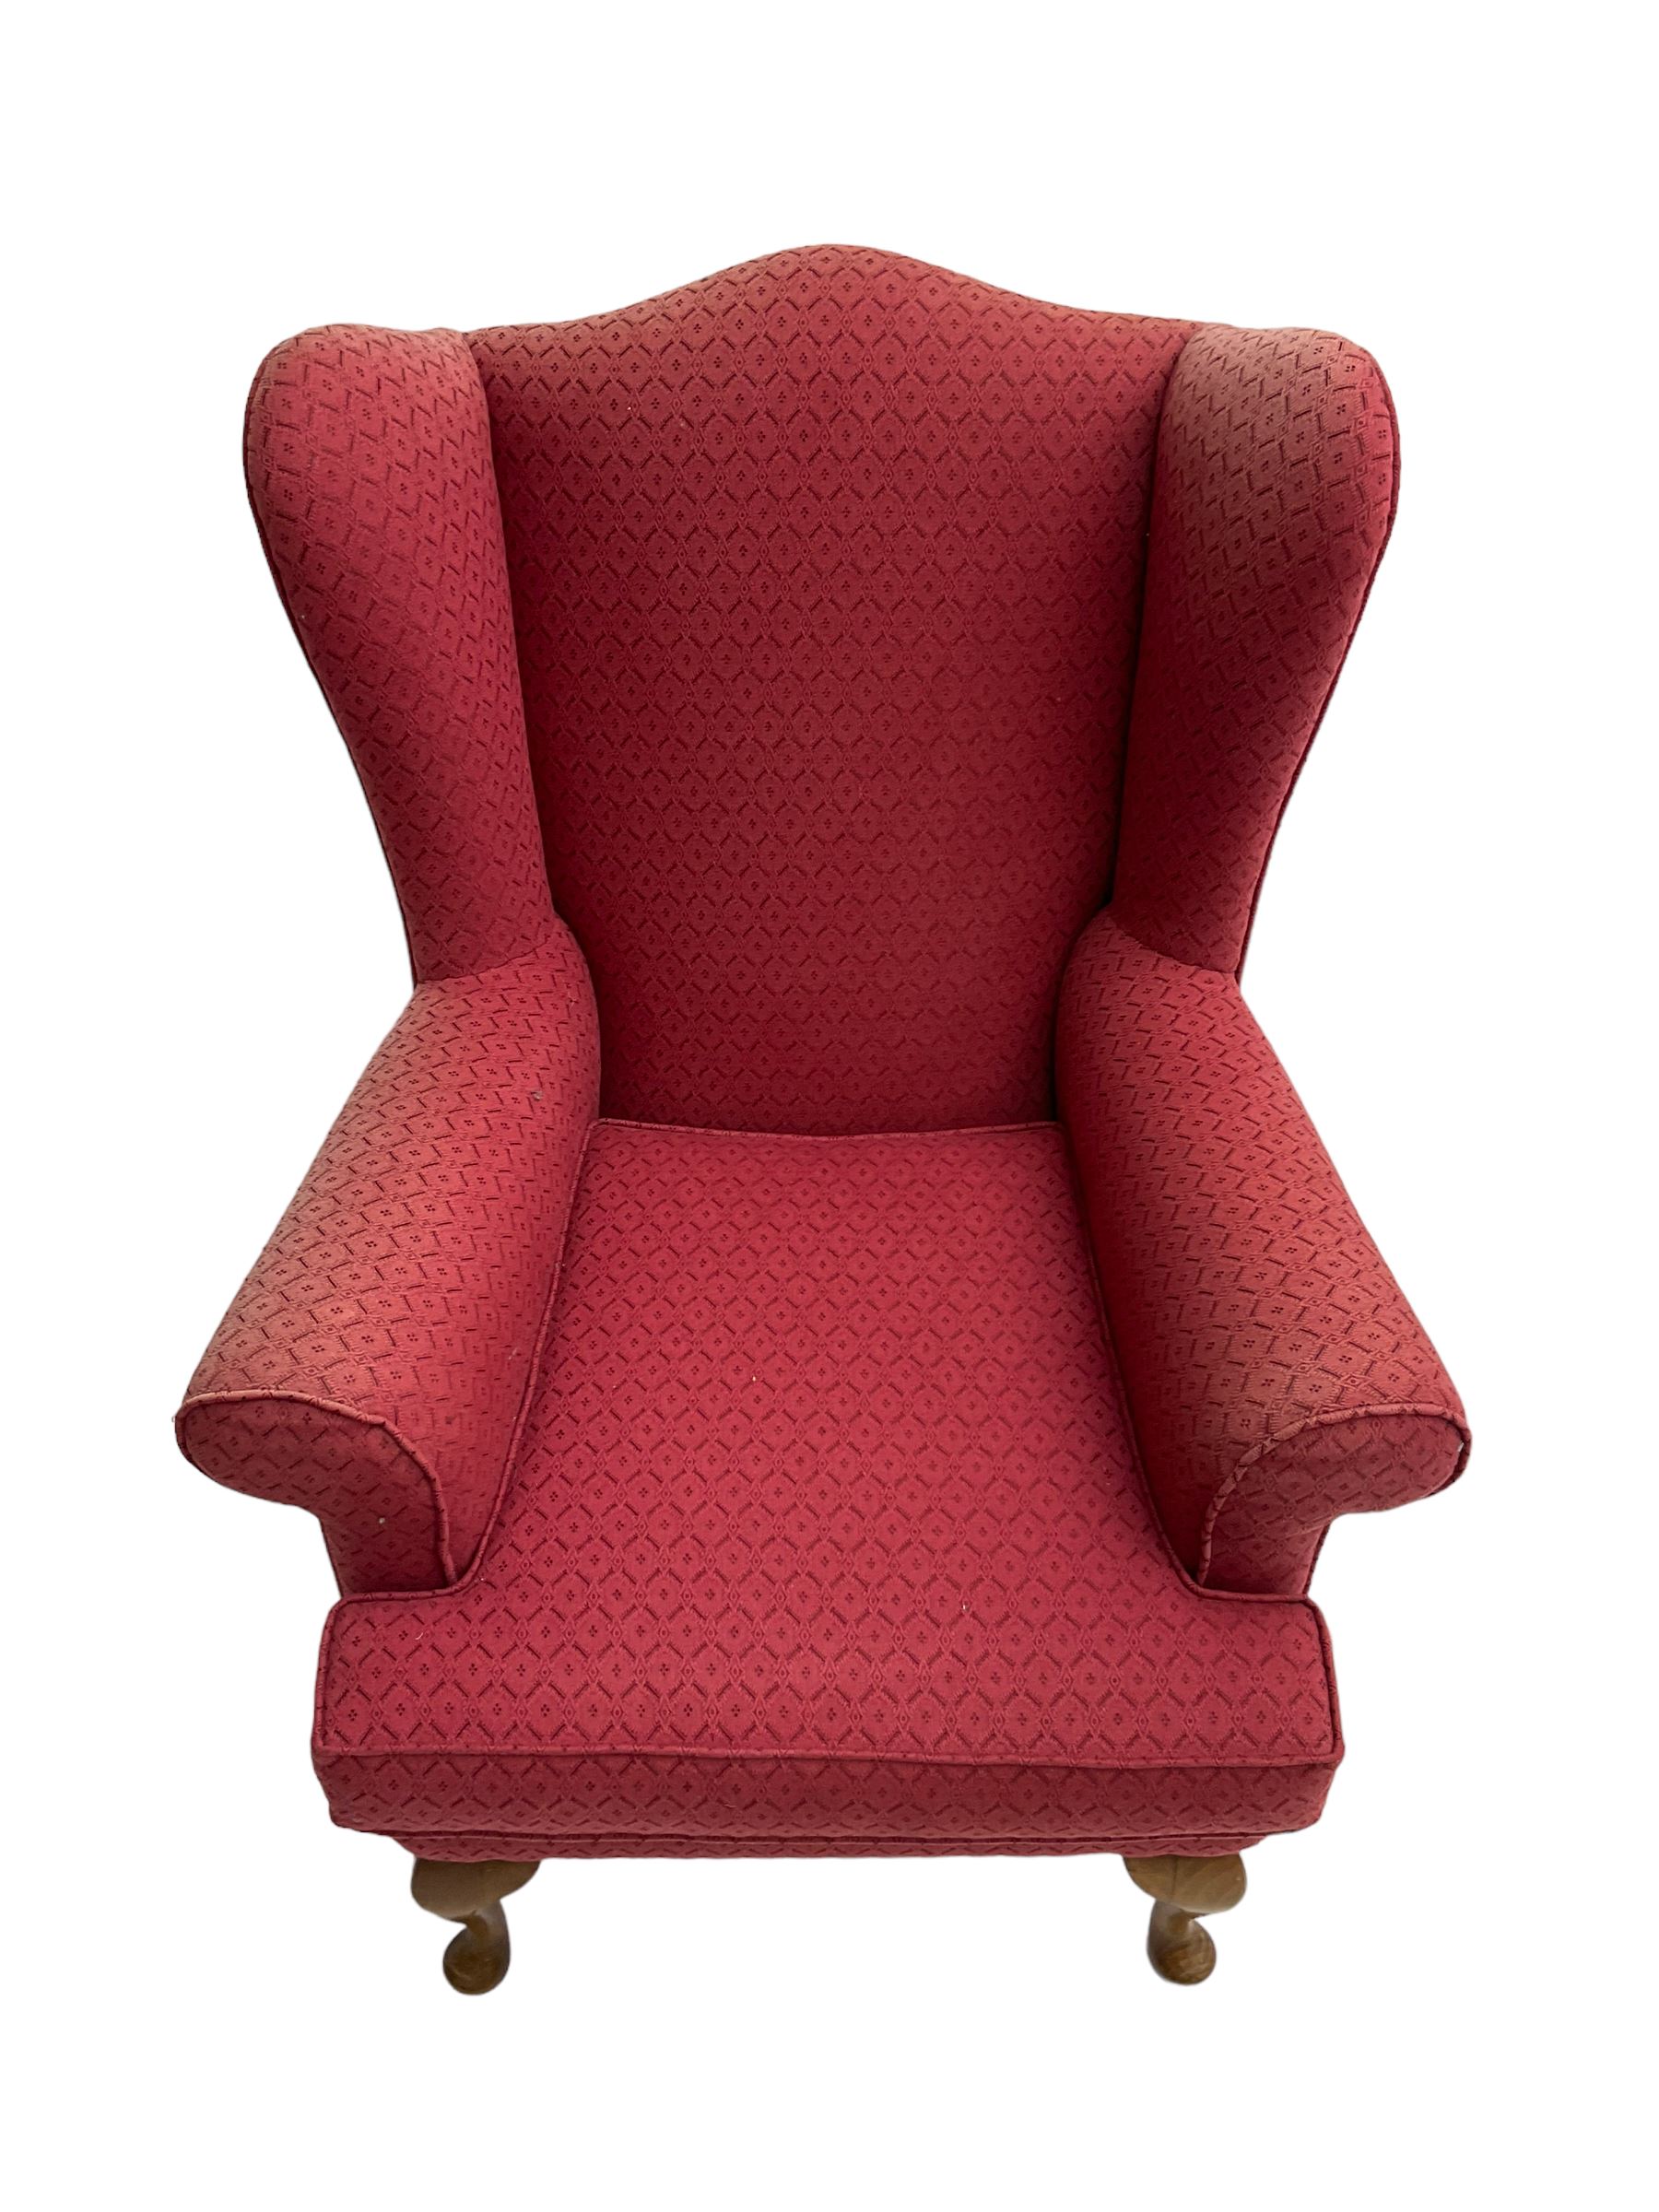 Queen Anne design wingback armchair - Image 4 of 7